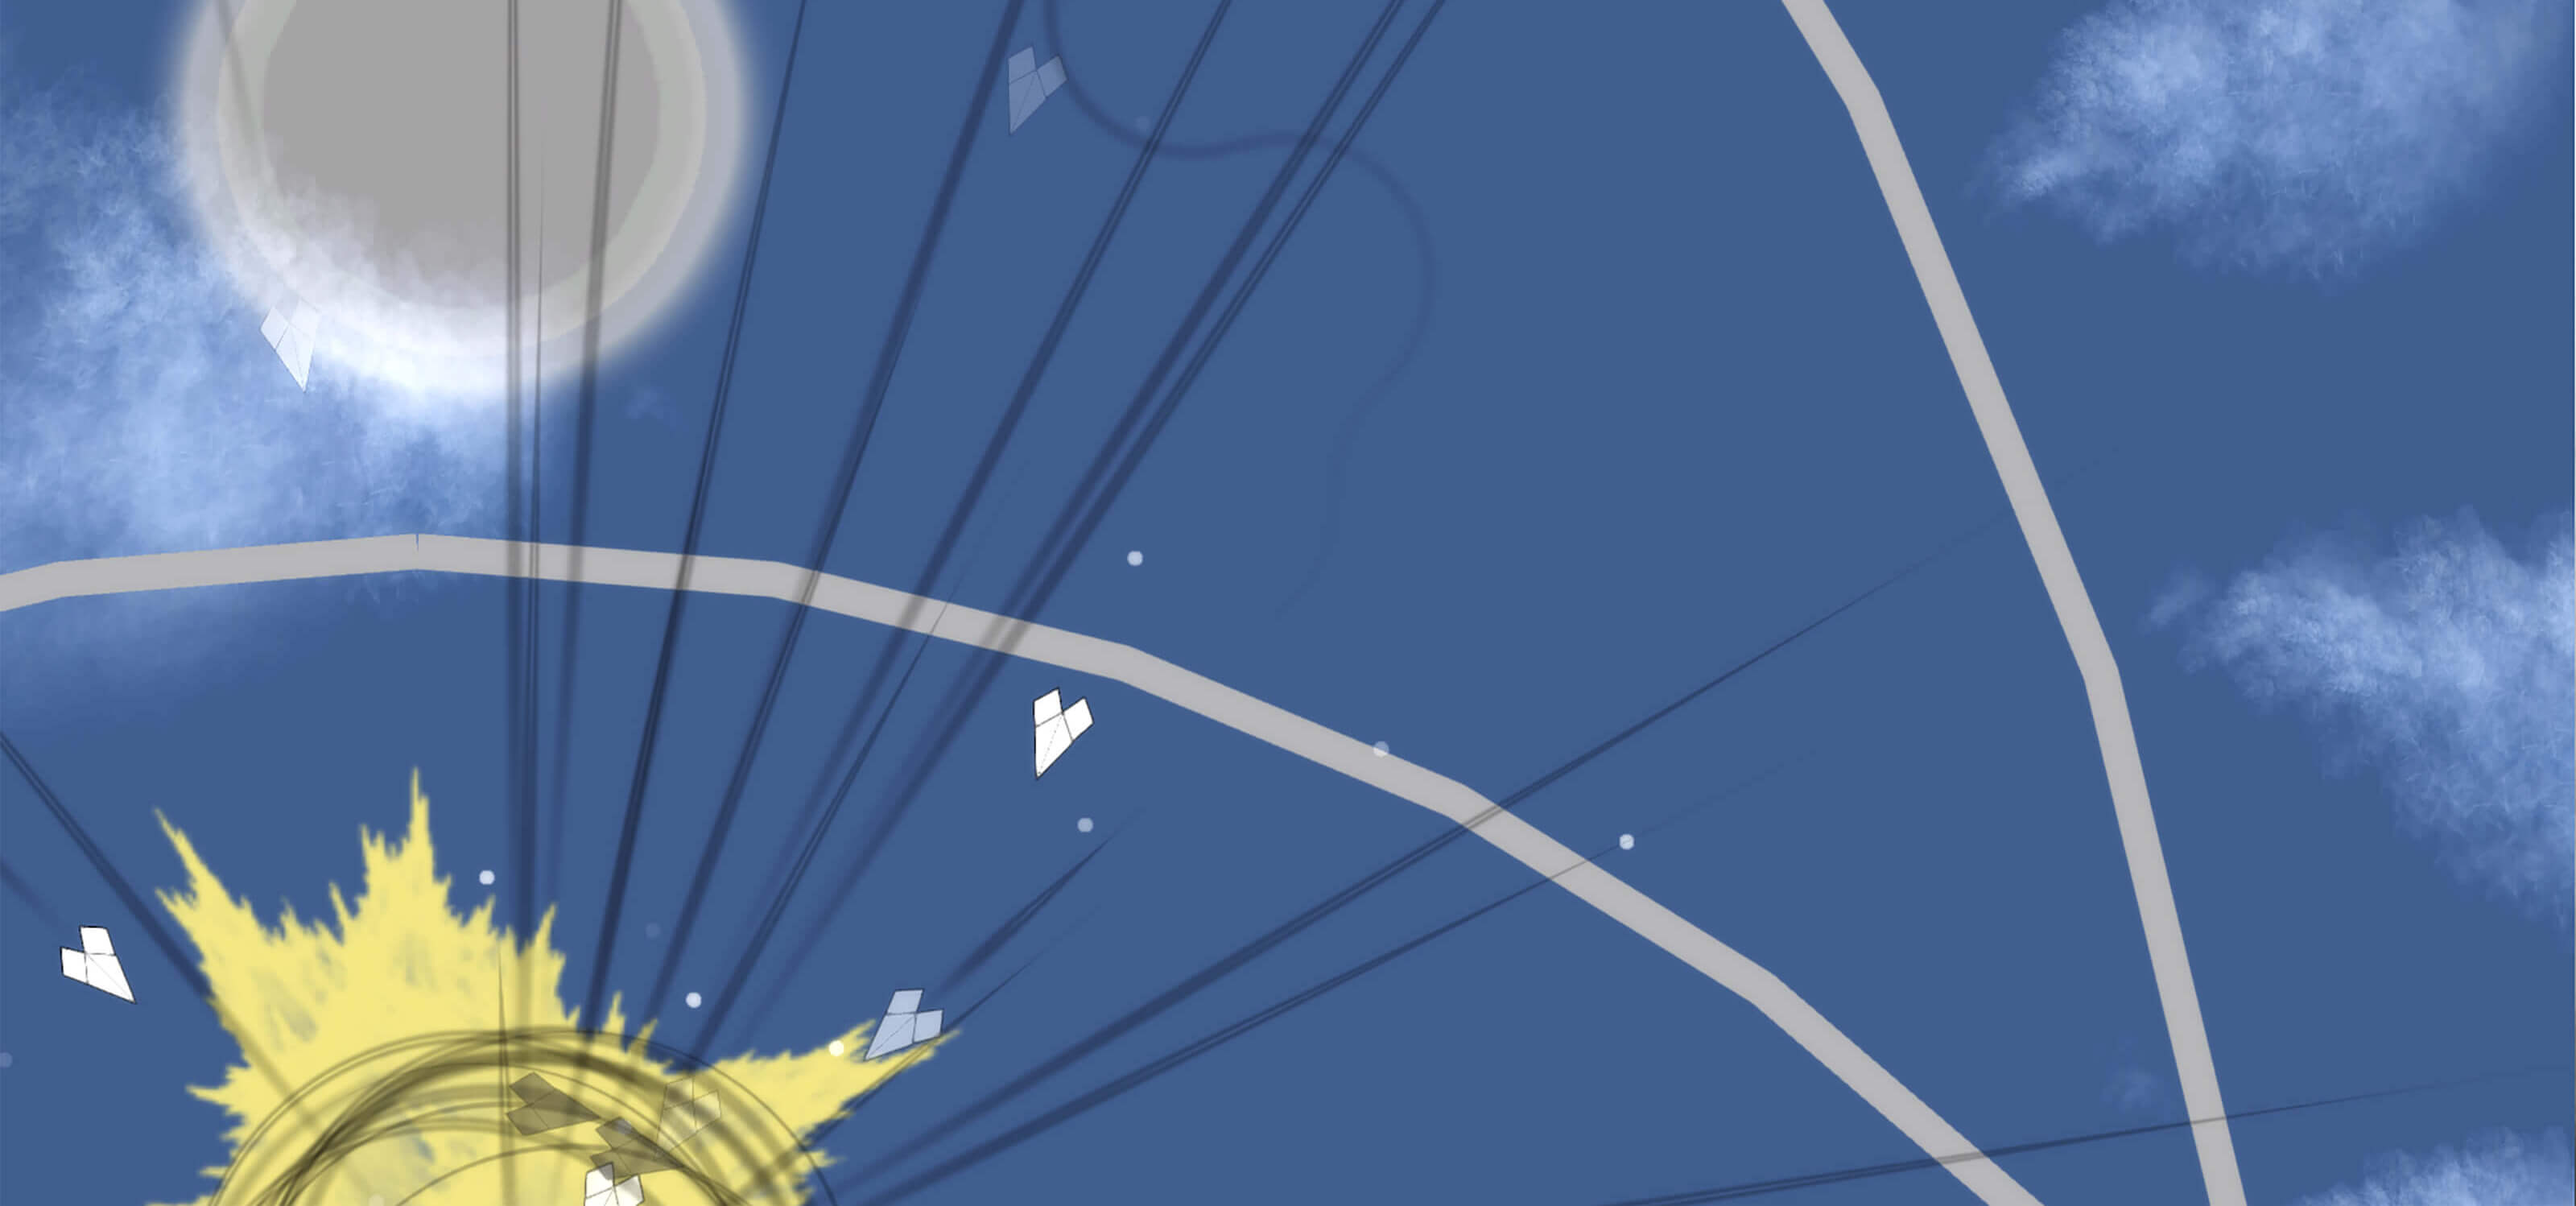 Screenshot from DigiPen Singapore student game Meaning, featuring paper airplanes floating through the sky